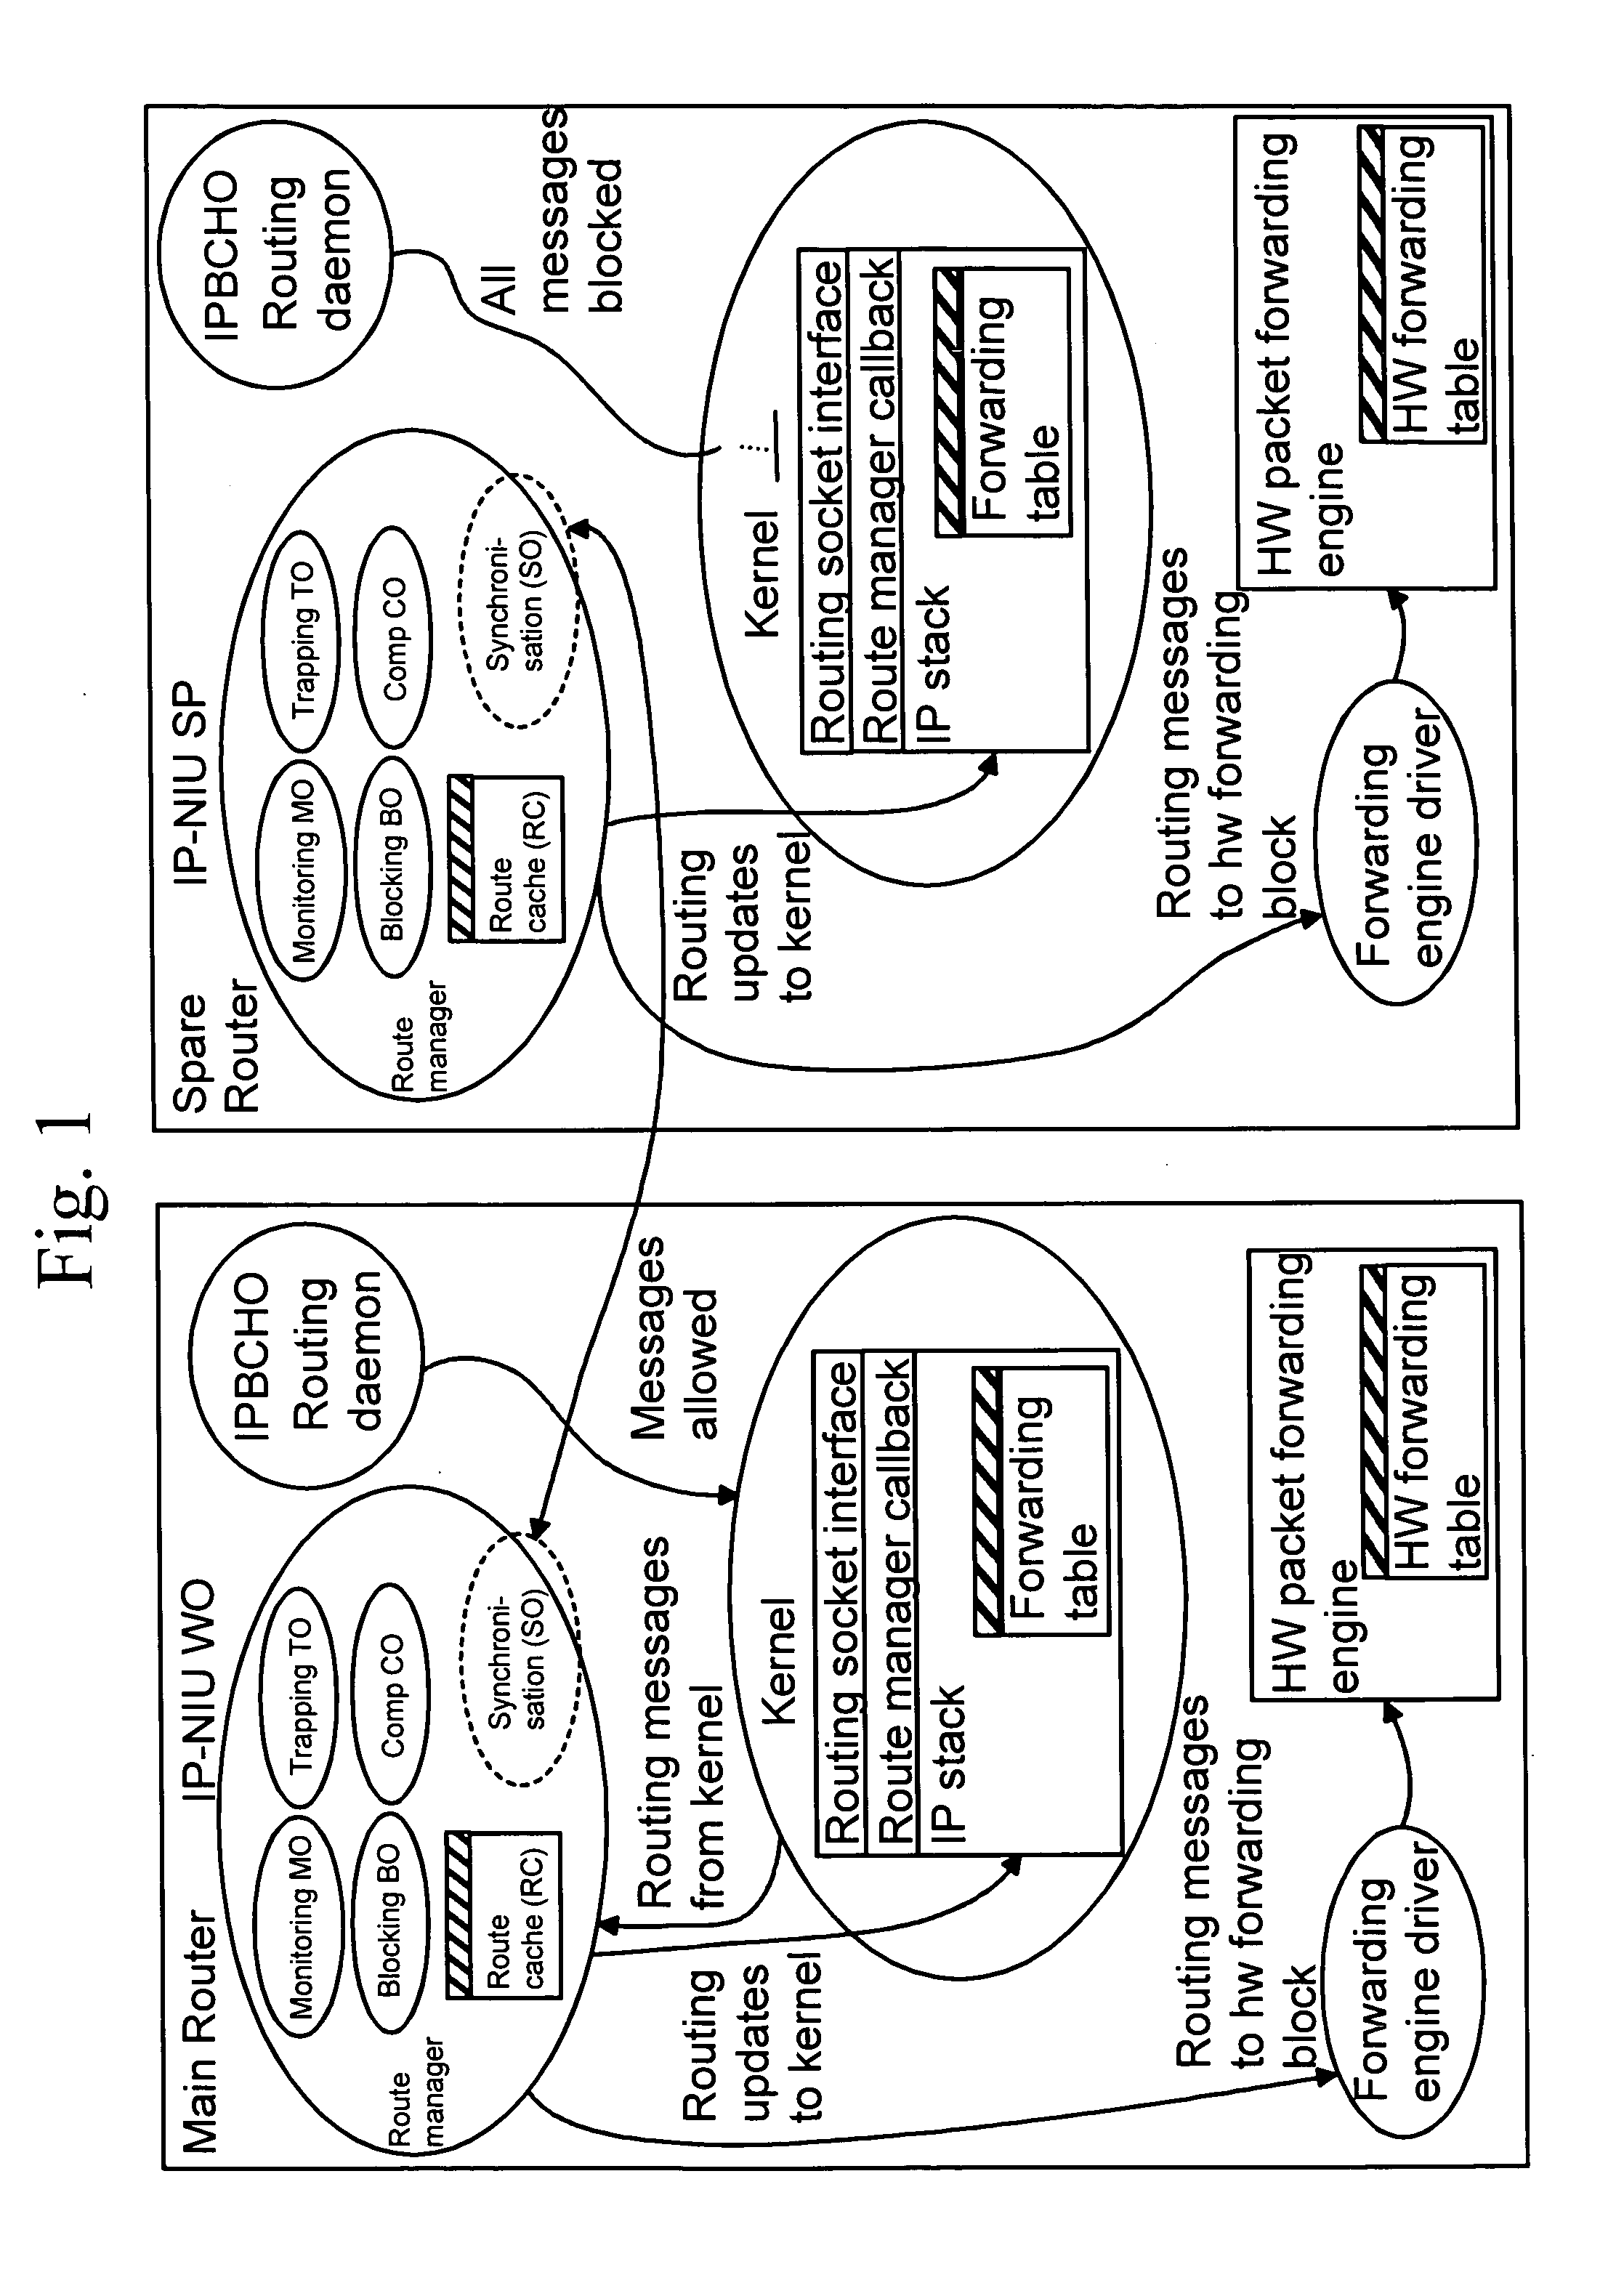 Method and system for redundant IP forwarding in a telecommunications network